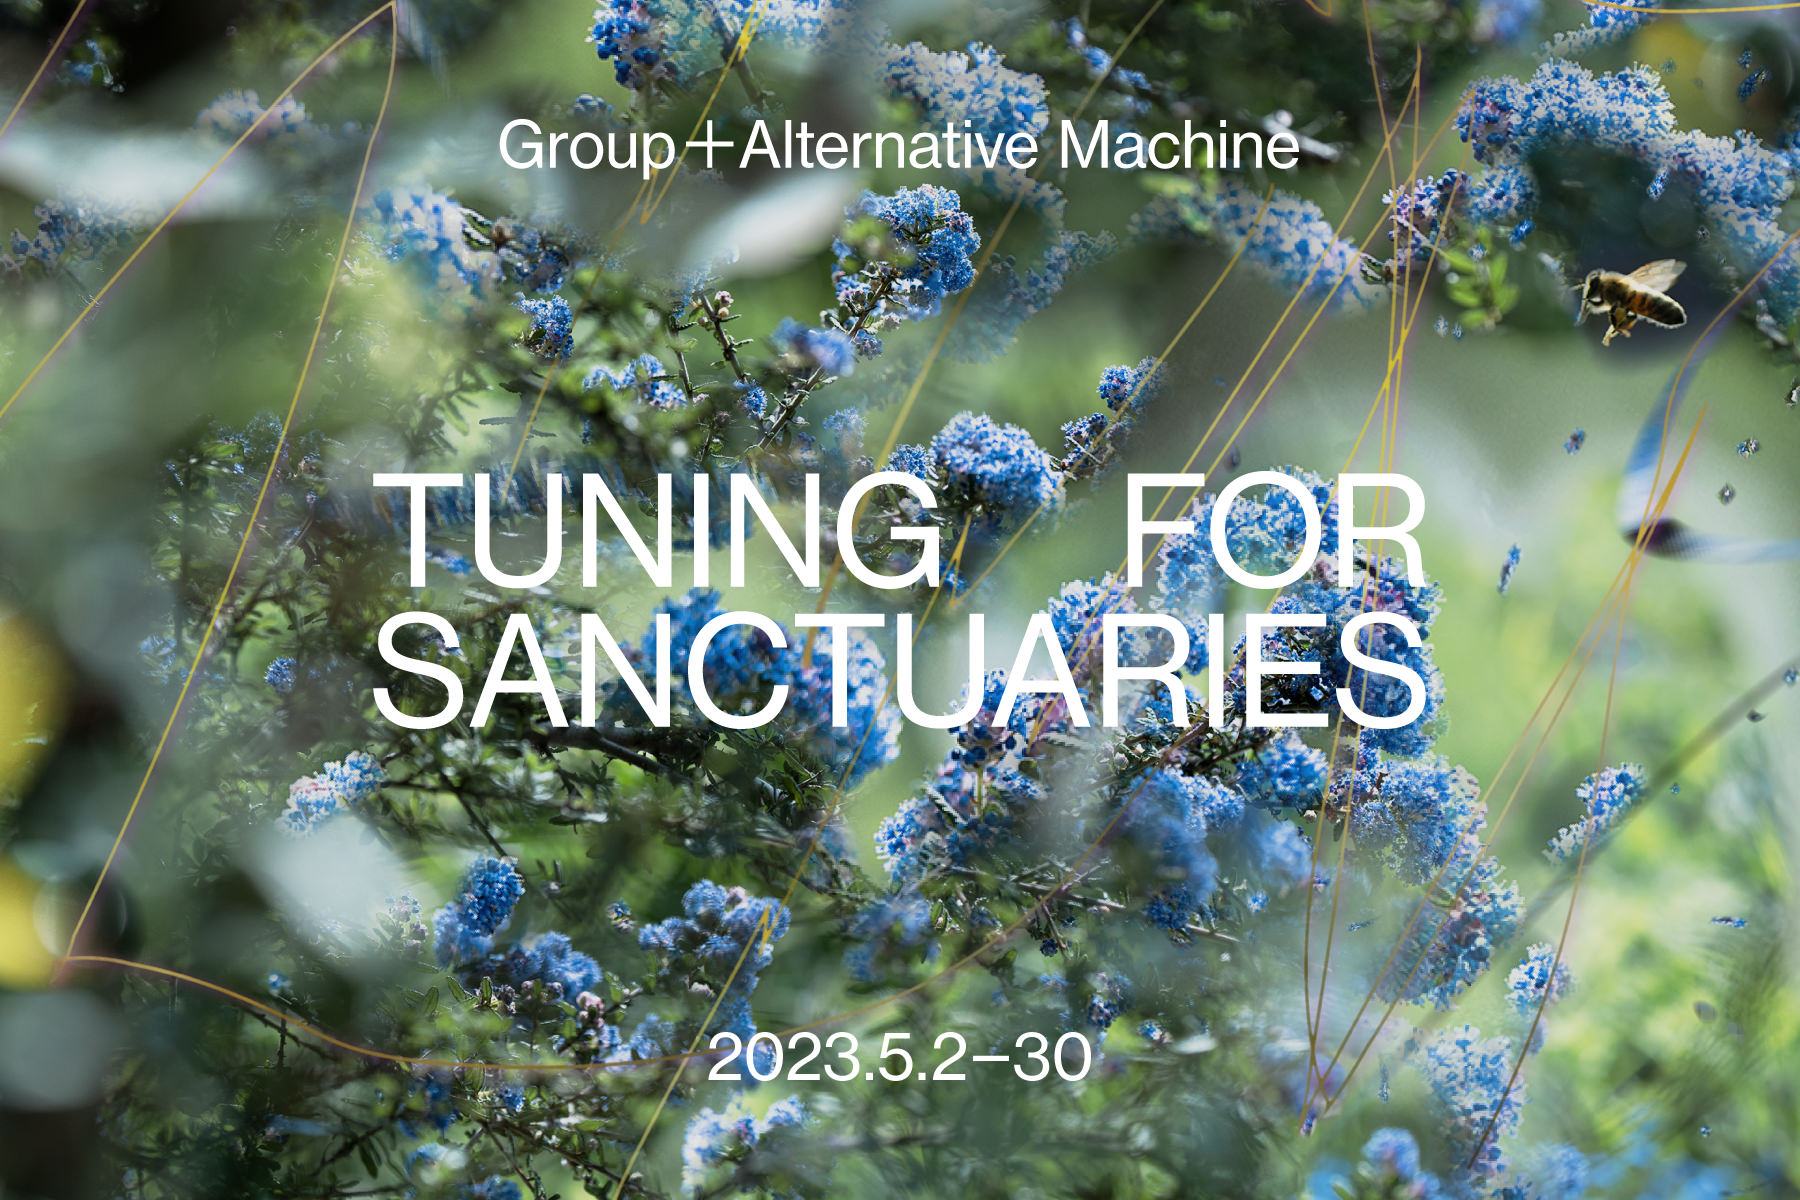 Group + Alternative Machine's Collaborative Project "Tuning for Sanctuaries" Exhibited at Sony Park mini